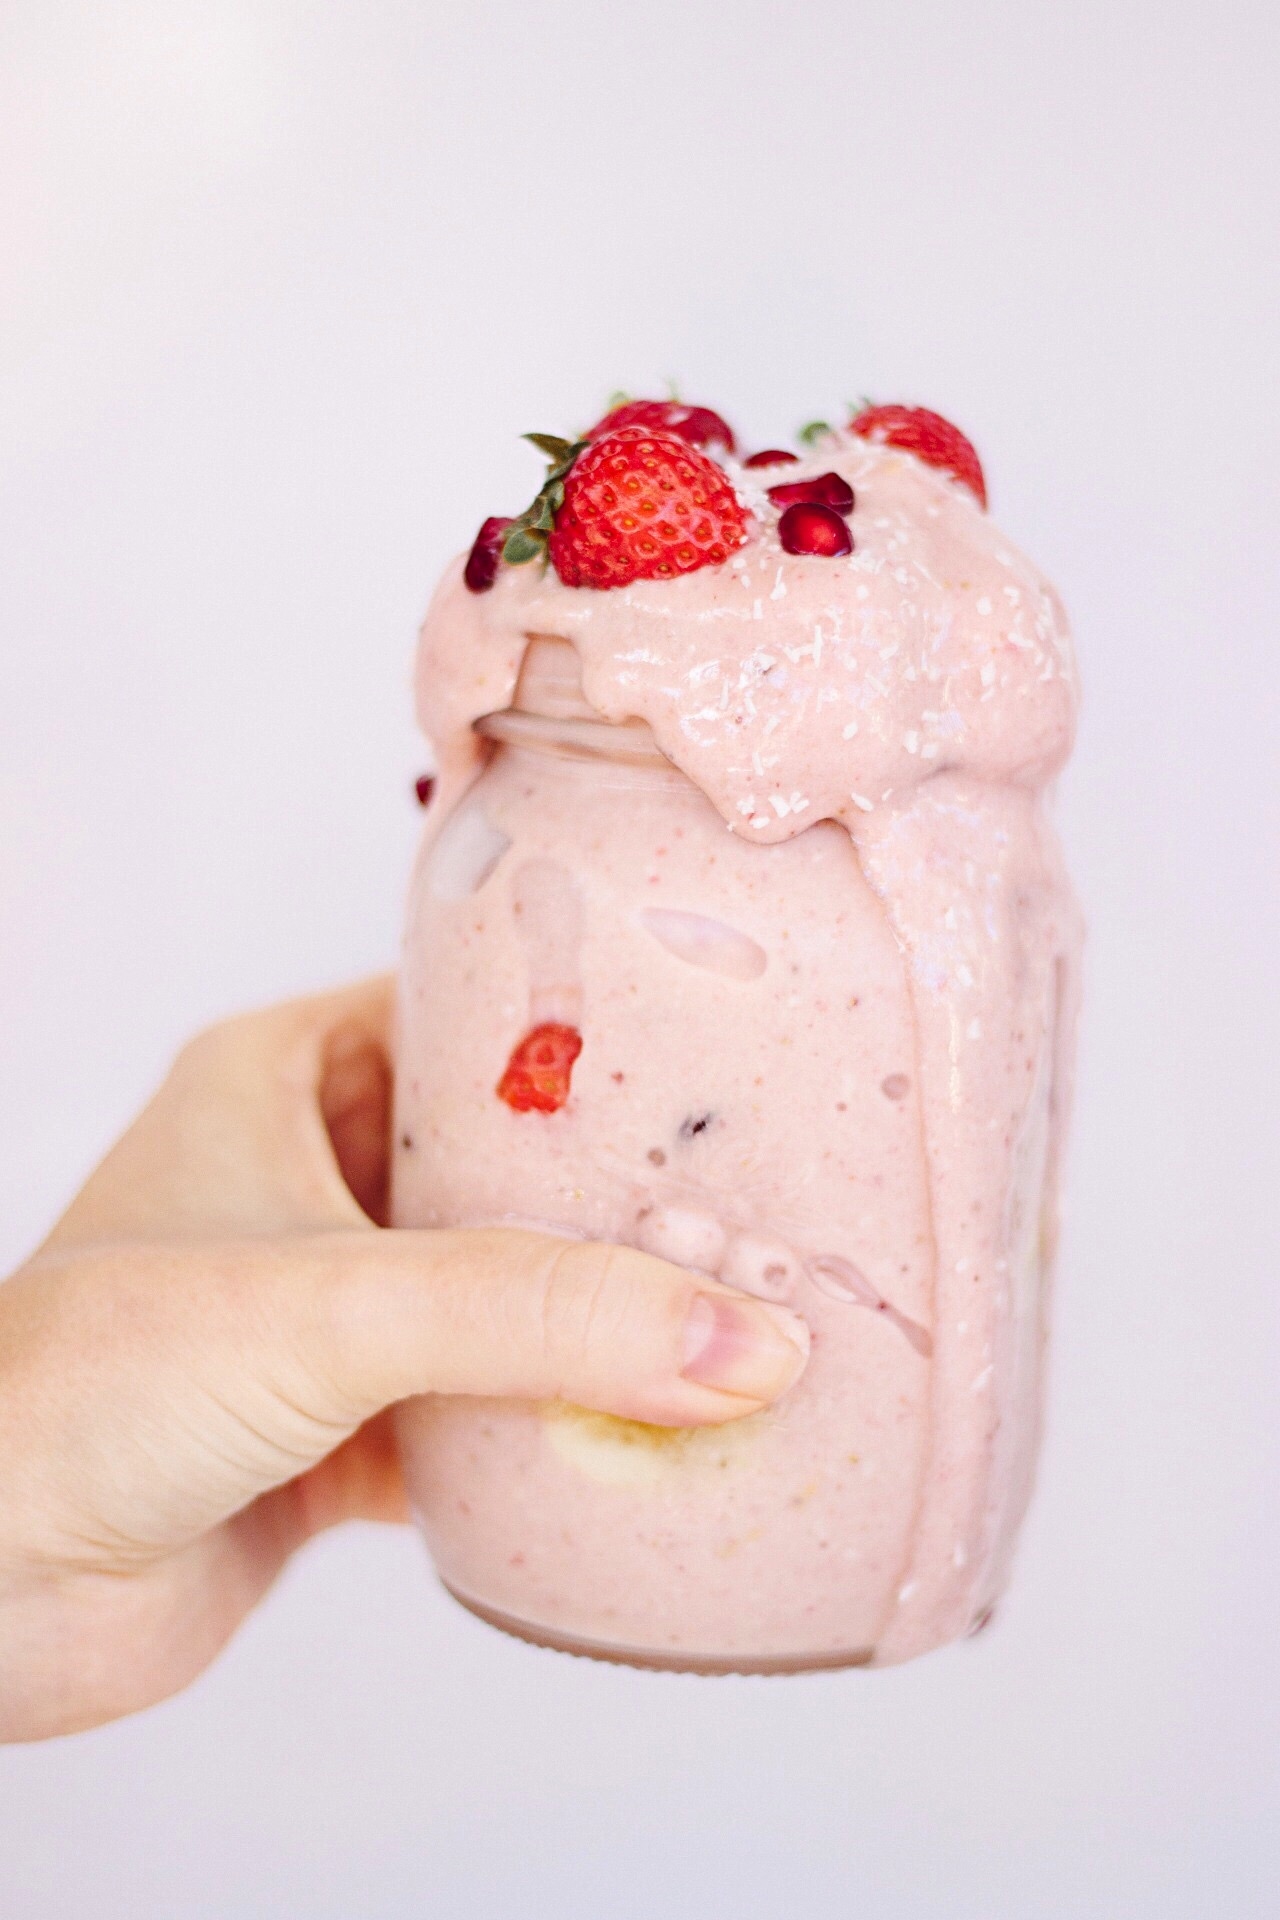 Strawberry collagen frappe recipe - healthy and homemade